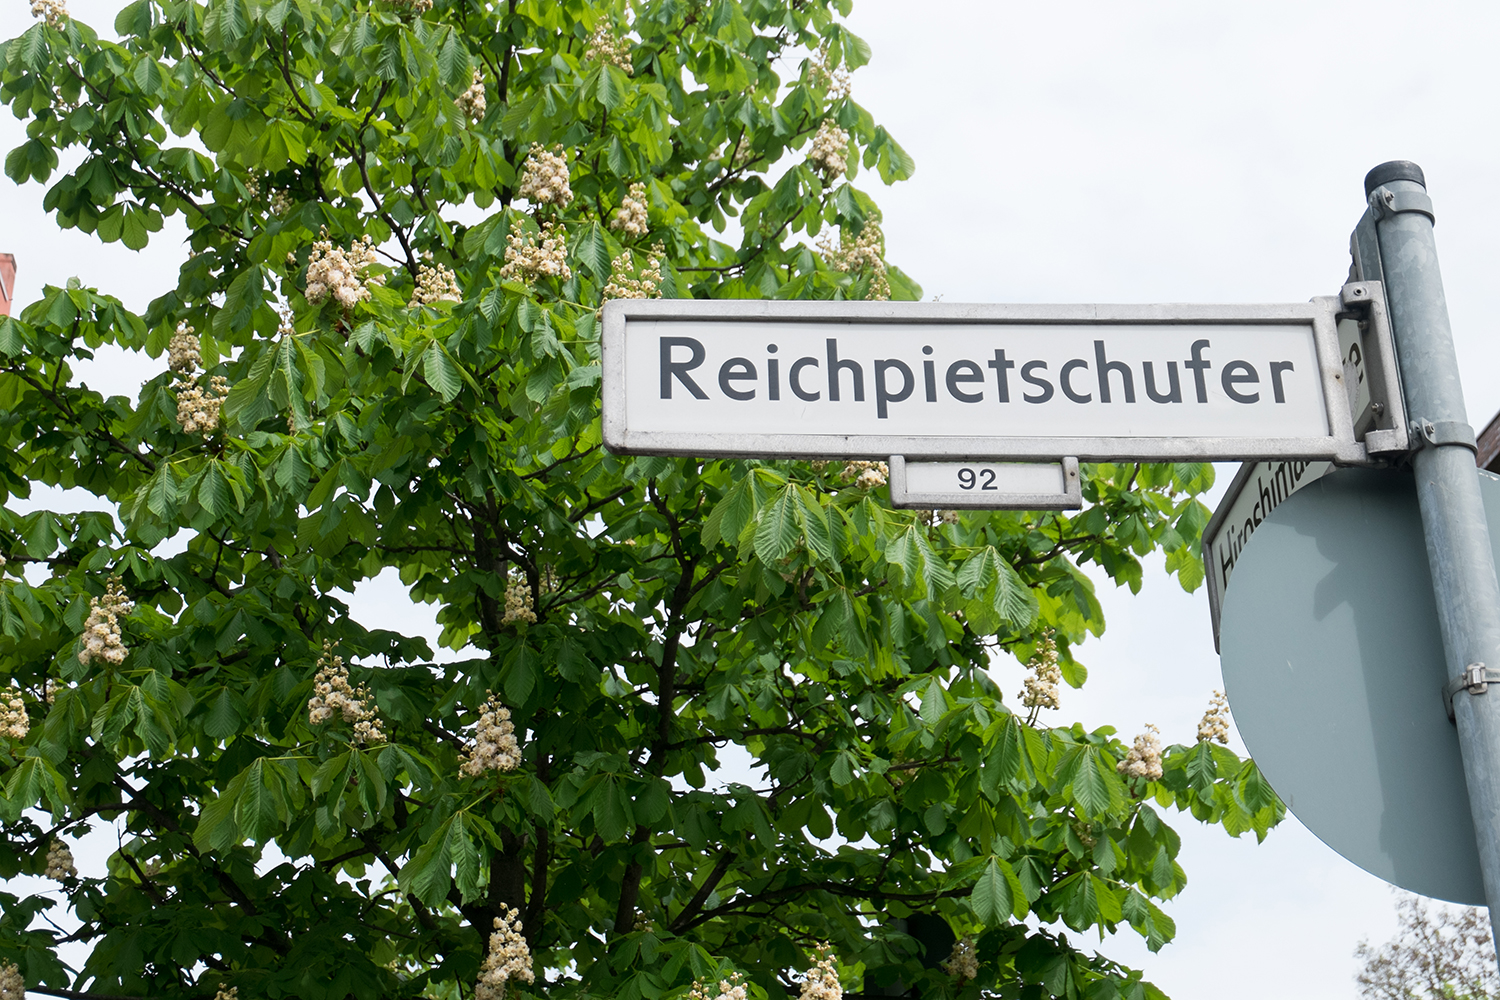 Street sign saying ‘Reichpietschufer’ in front of a chestnut tree